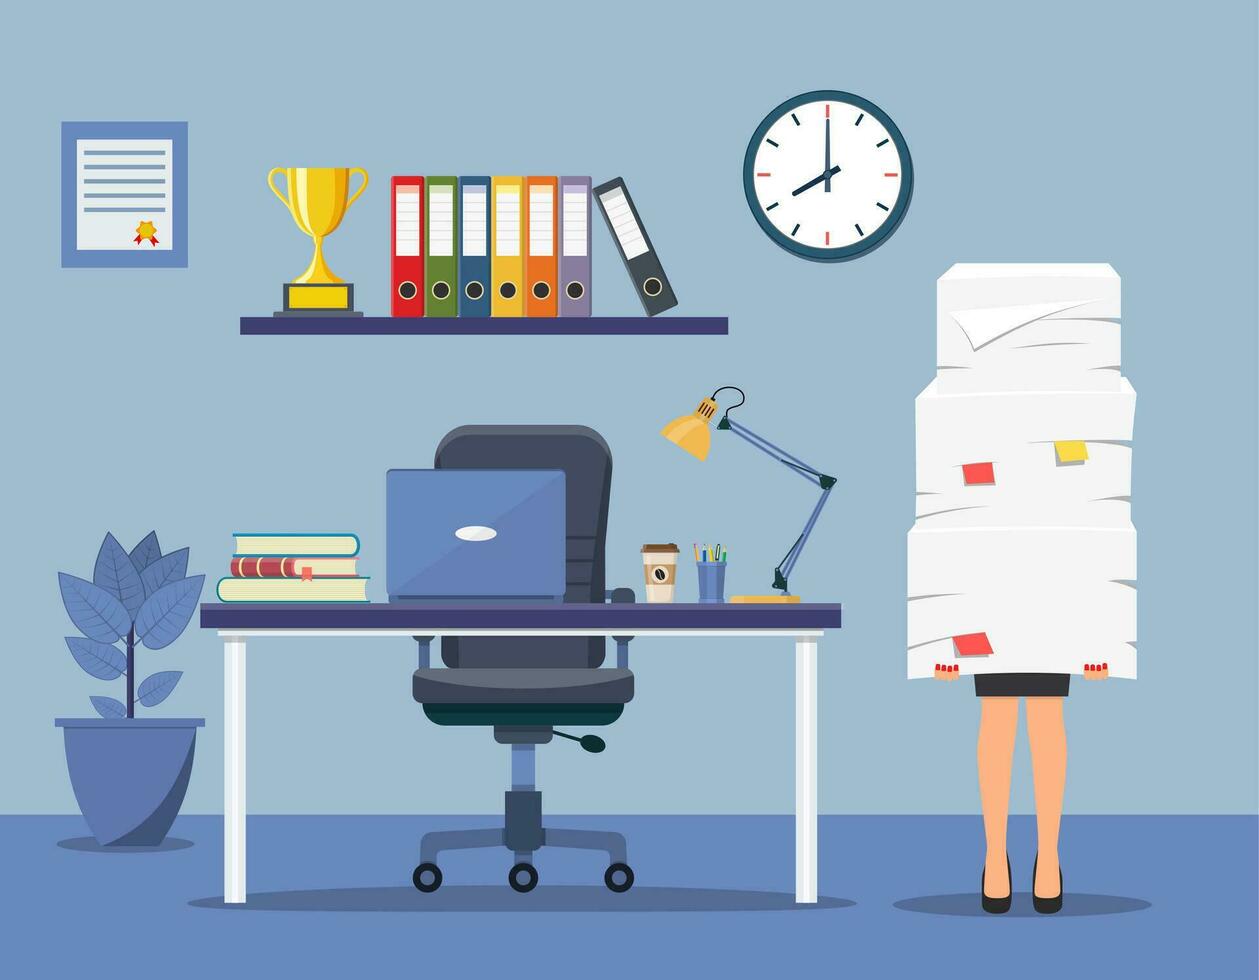 Office interior with desk, chair, computer. Stressed businesswoman holds pile of office papers and documents. Paperwork. Bureaucracy concept. Stressed employee. vector illustration in flat design.